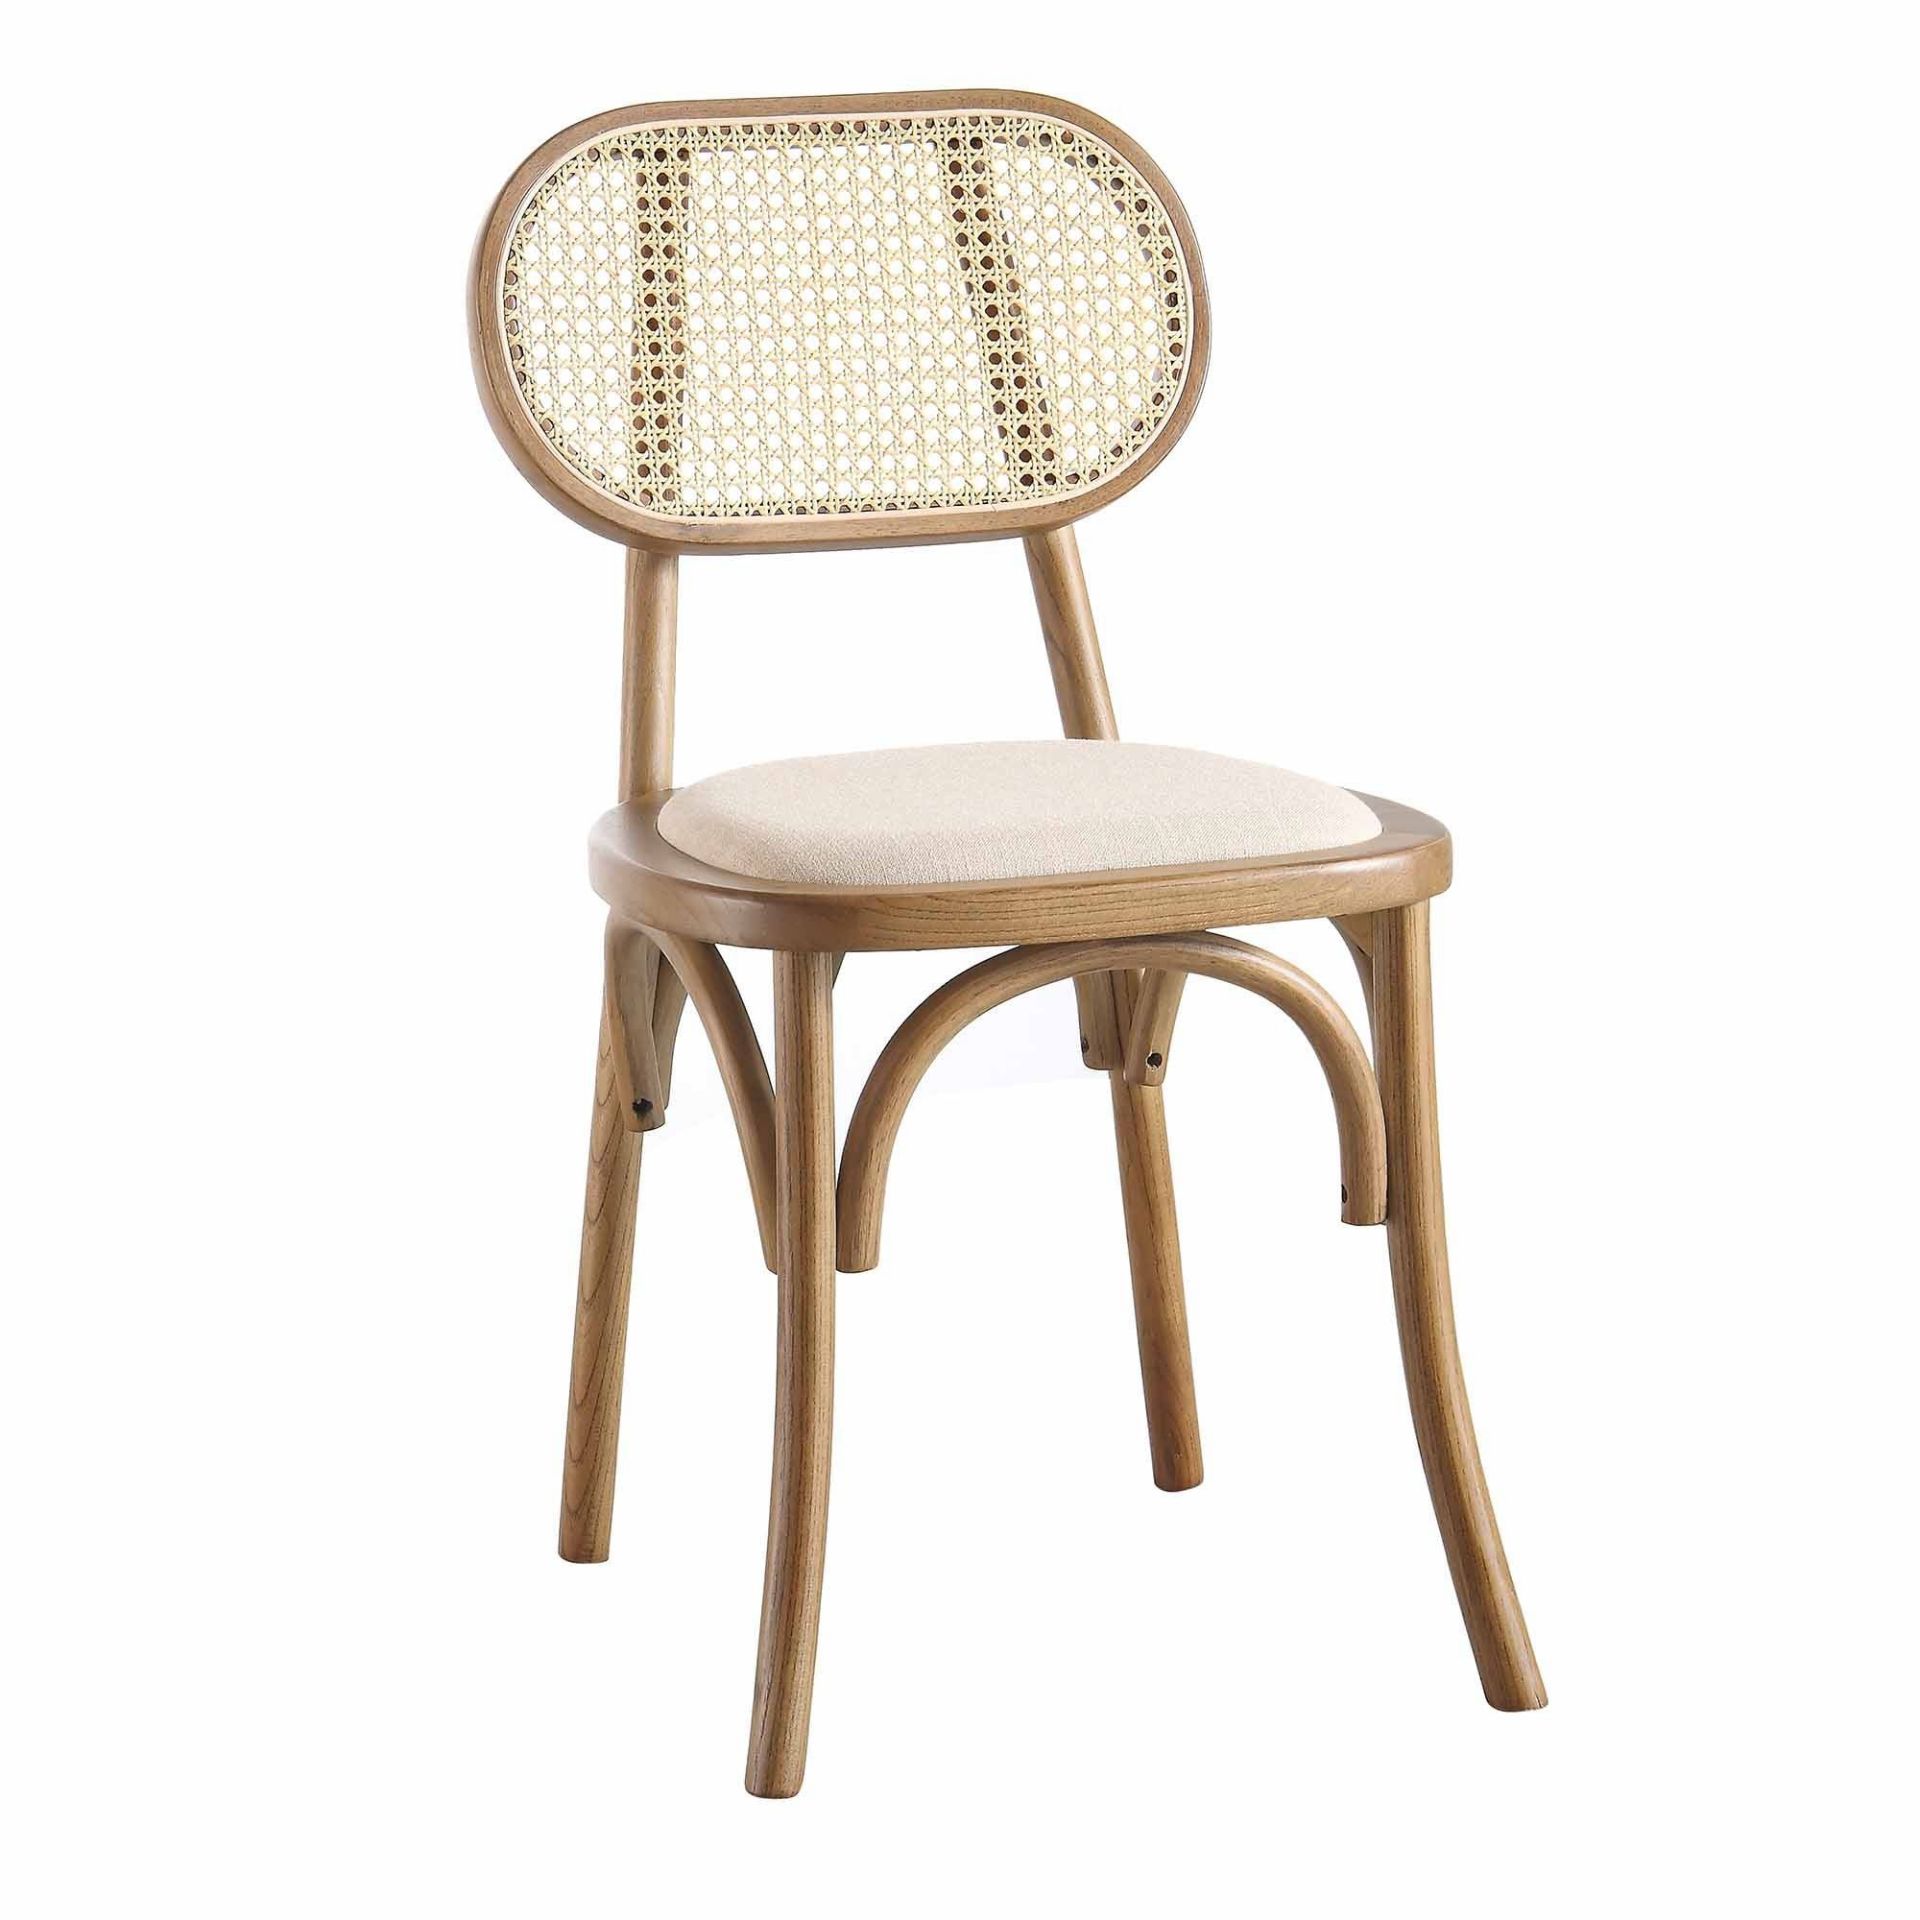 Anya Set of 2 Cane Rattan and Upholstered Dining Chairs, Light Walnut. -ER29. RRP £319.99. - Image 2 of 2